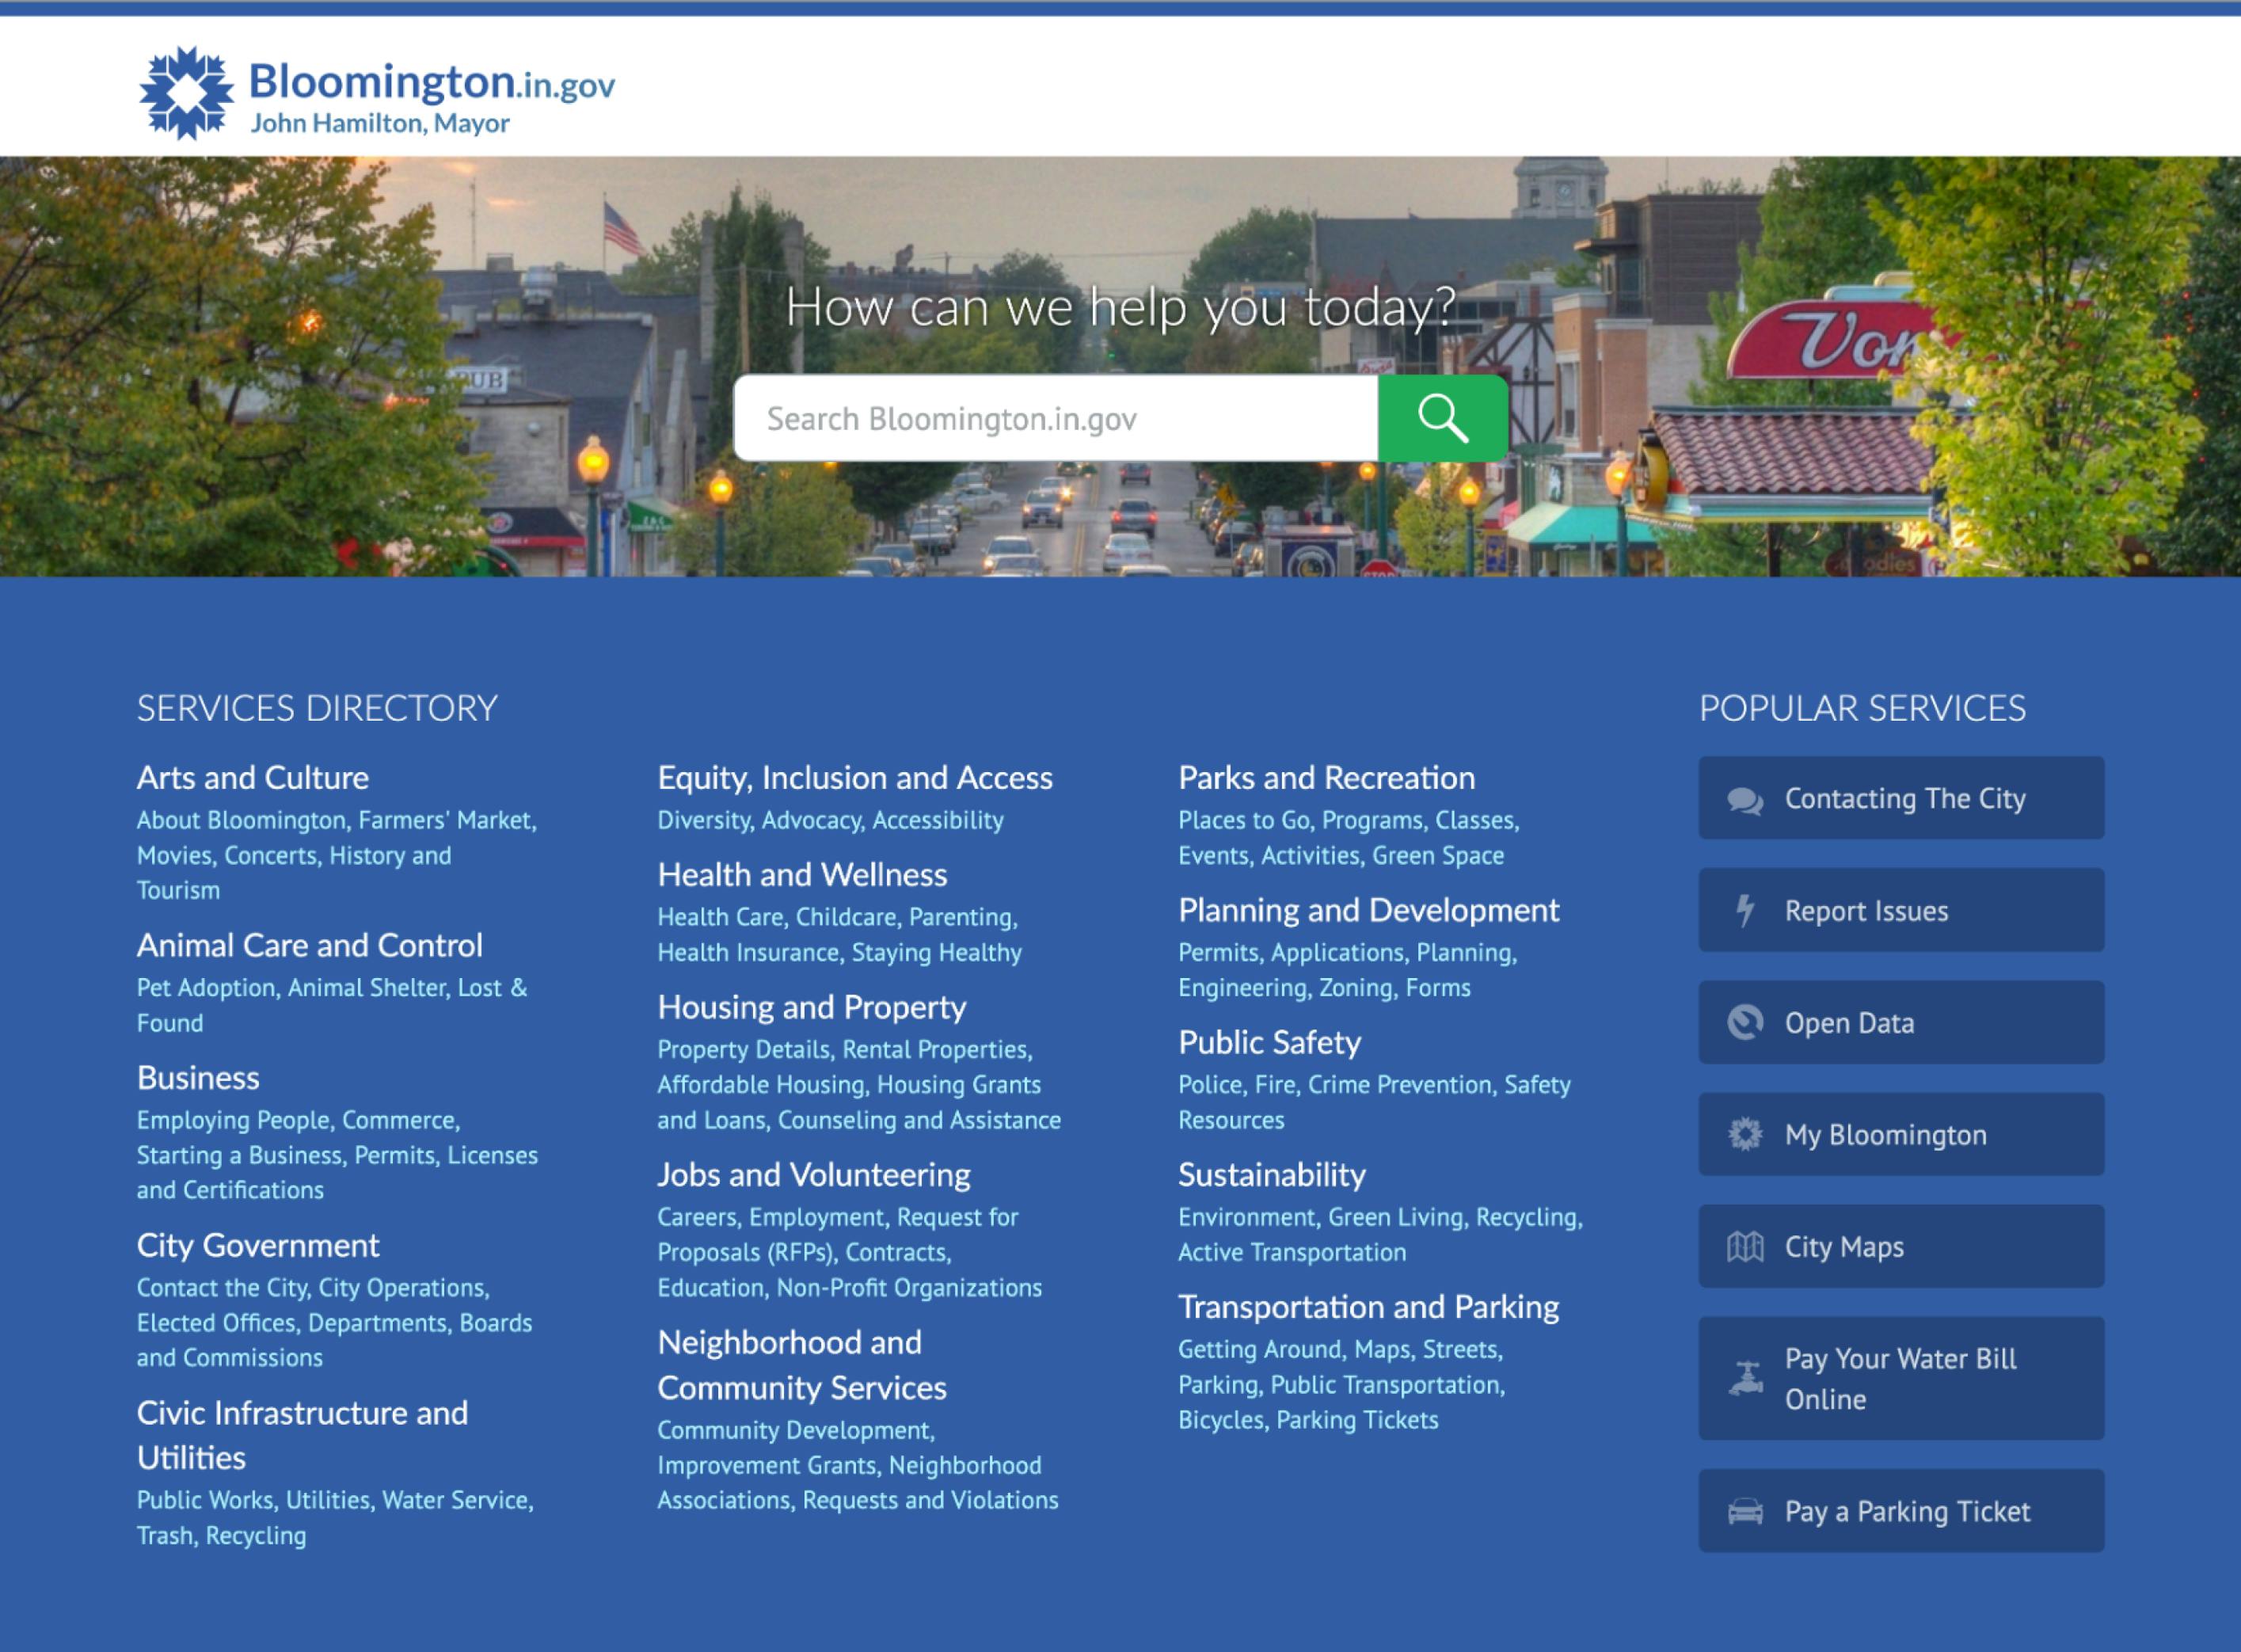 A screen shot of the City home page, showing a directory of services sorted by category, as opposed to being sorted by City Department.